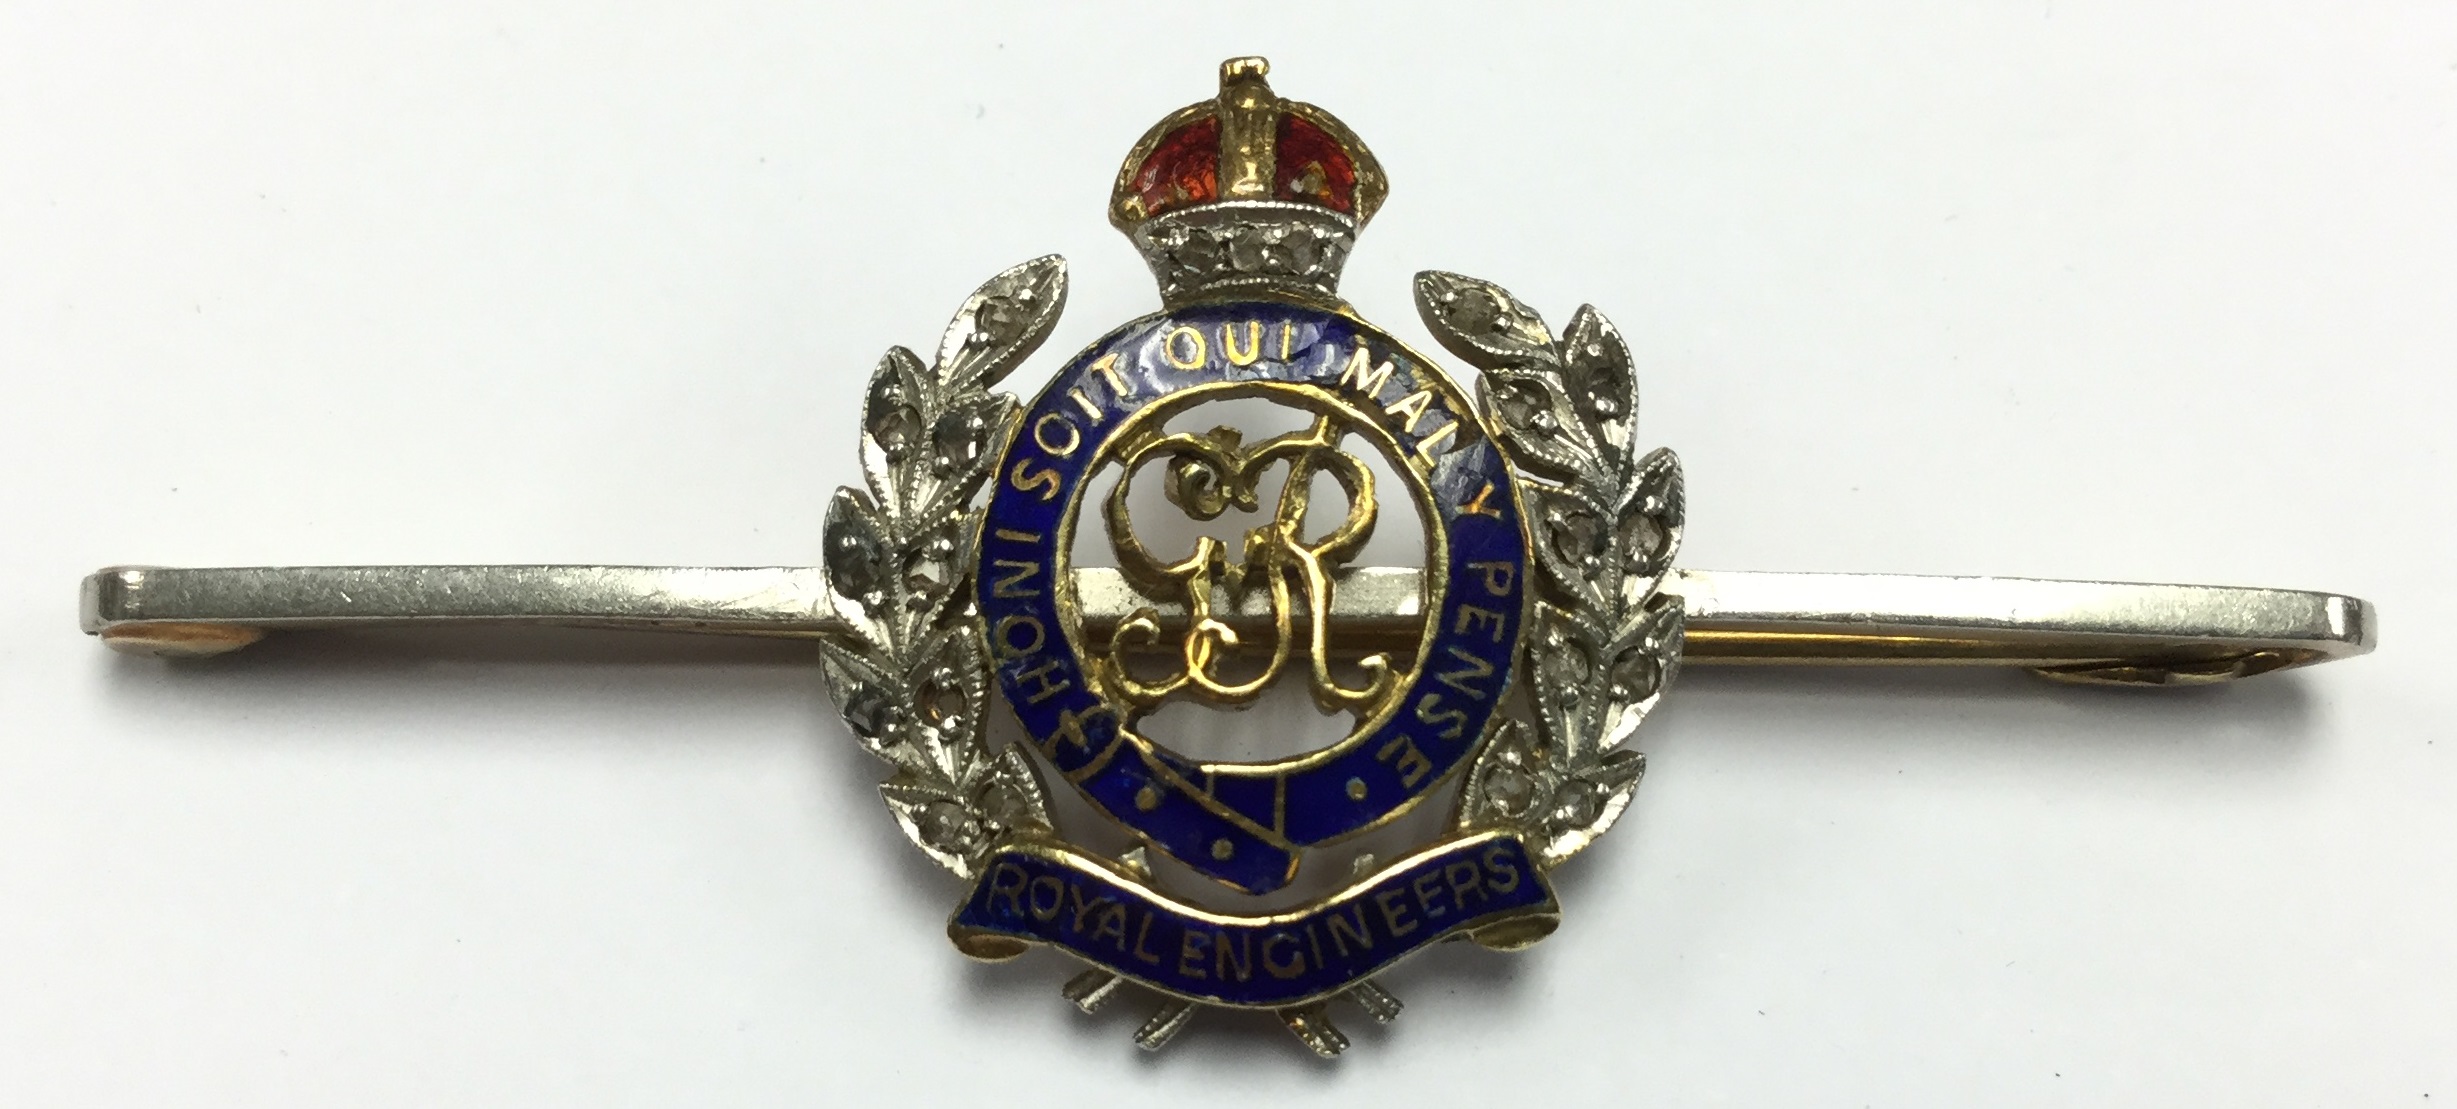 WW2 British Royal Engineers Sweetheart Brooch in 9ct Gold with Platinum and coloured enamels.